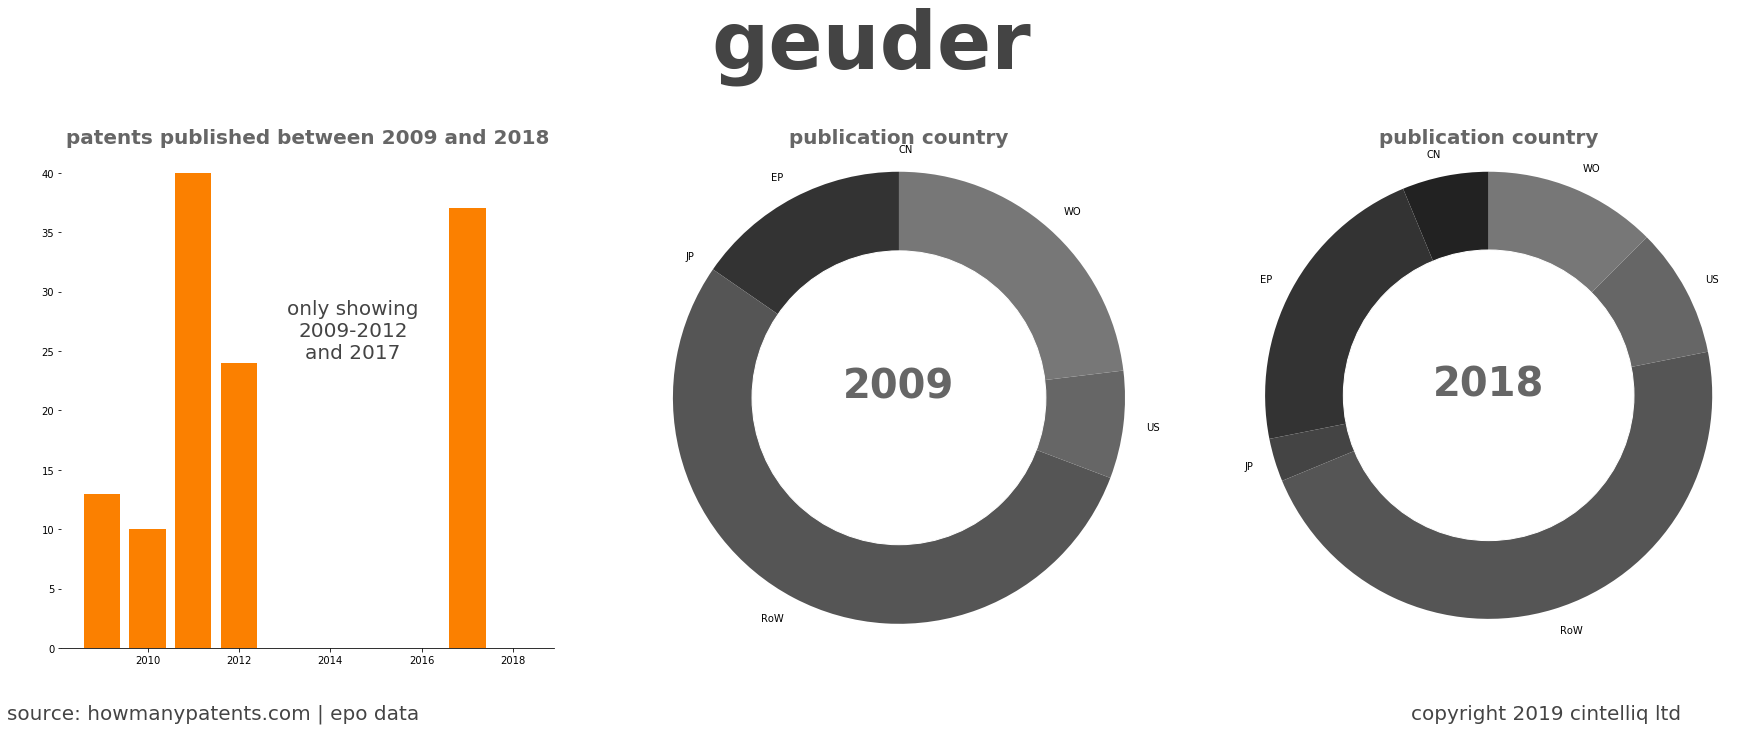 summary of patents for Geuder